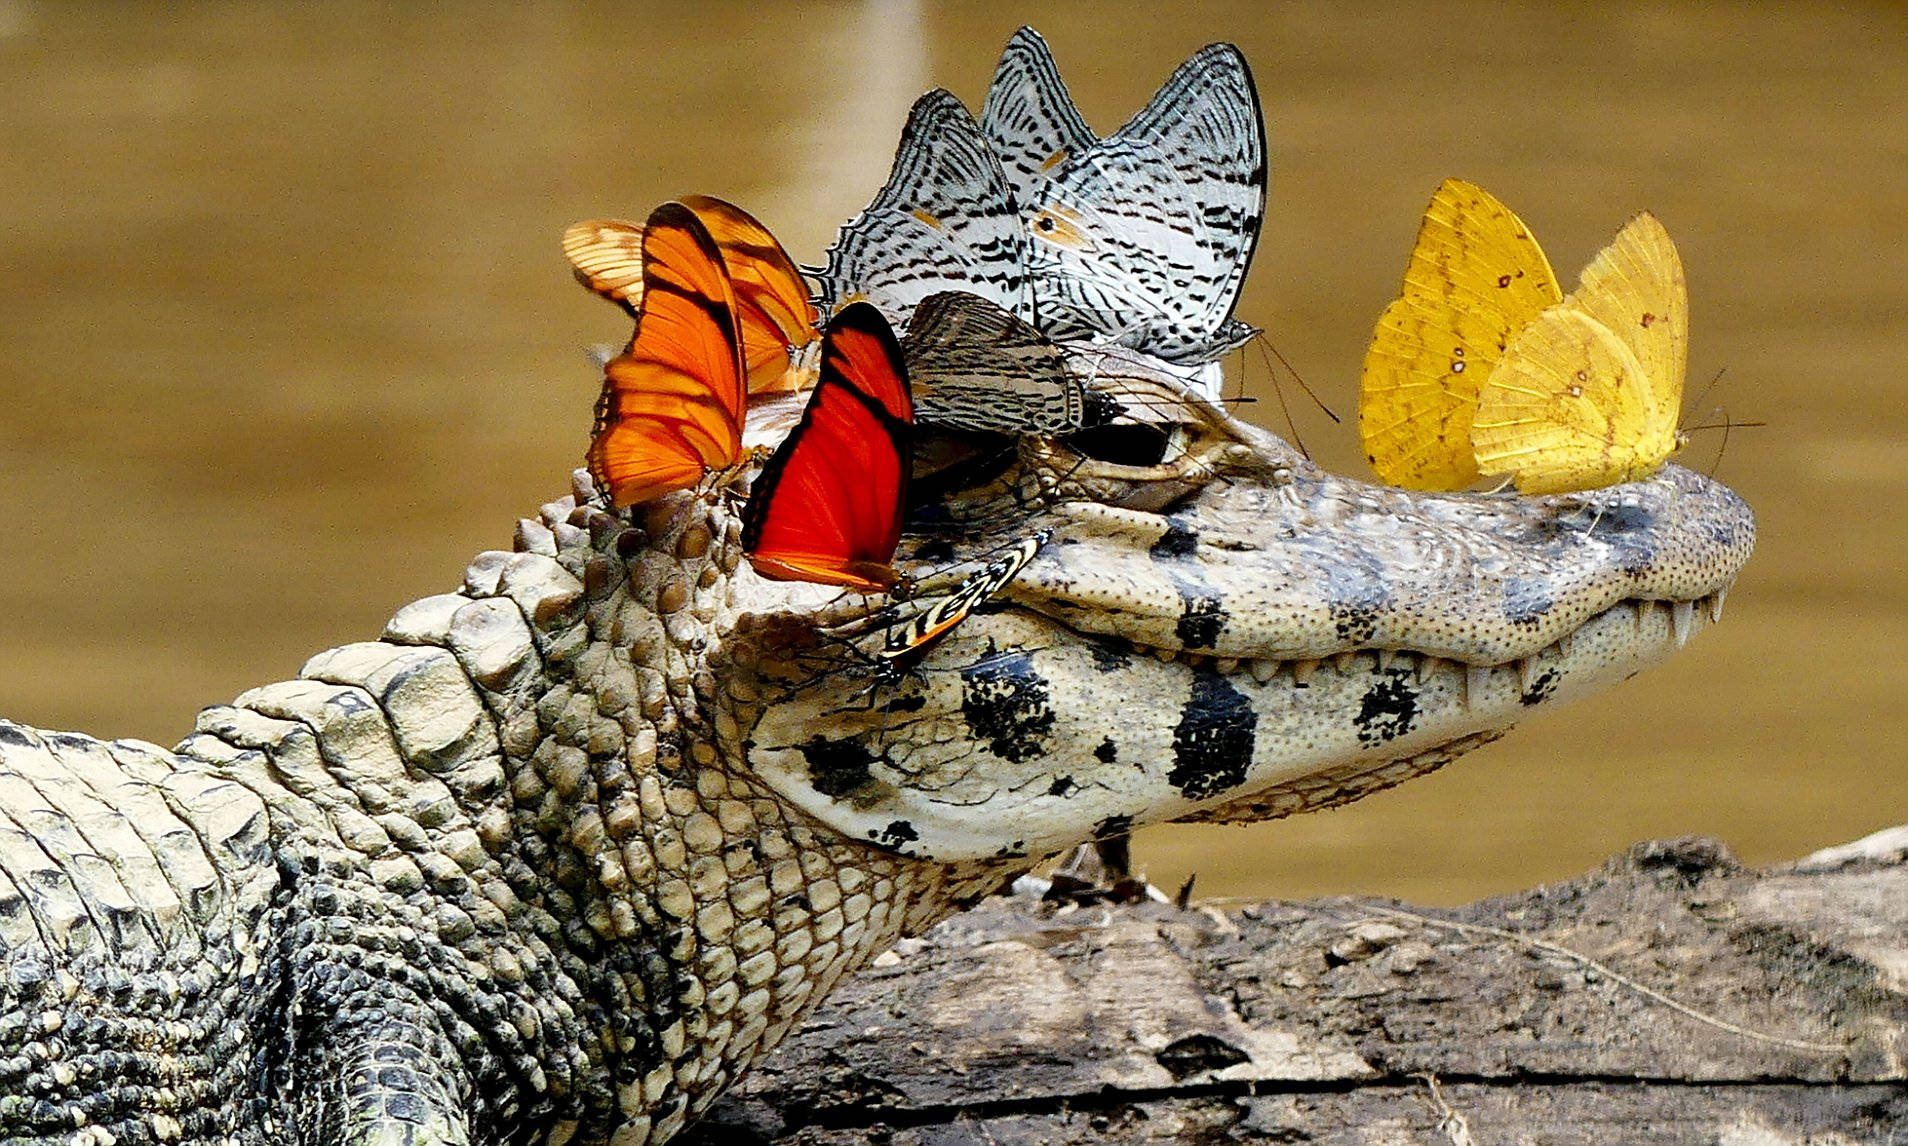 Pretty Alligator With Colorful Butterflies